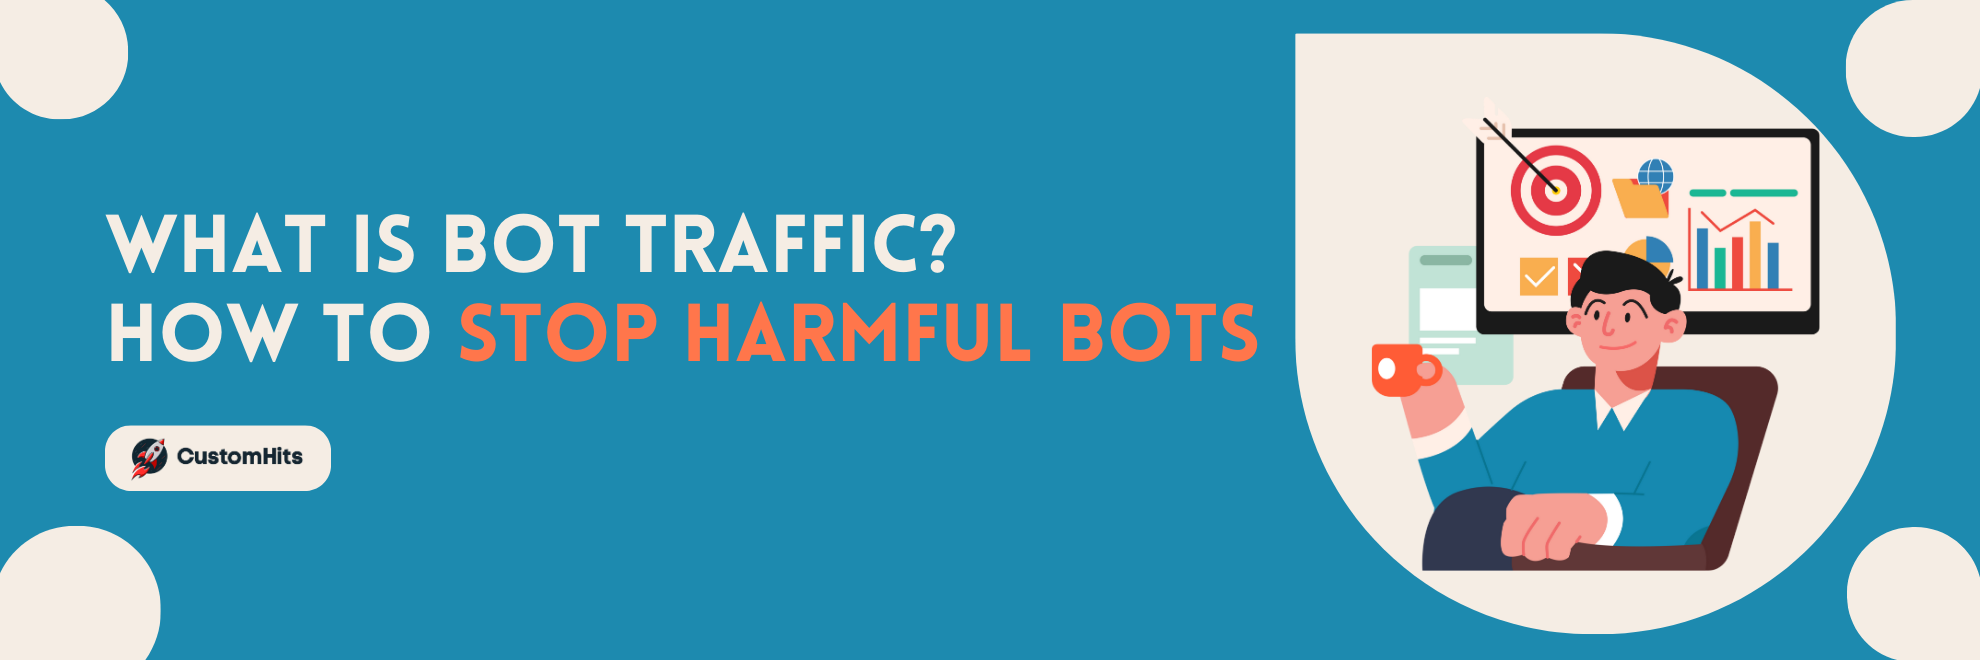 What Is Bot Traffic? And How To Stop Harmful Traffic Bots